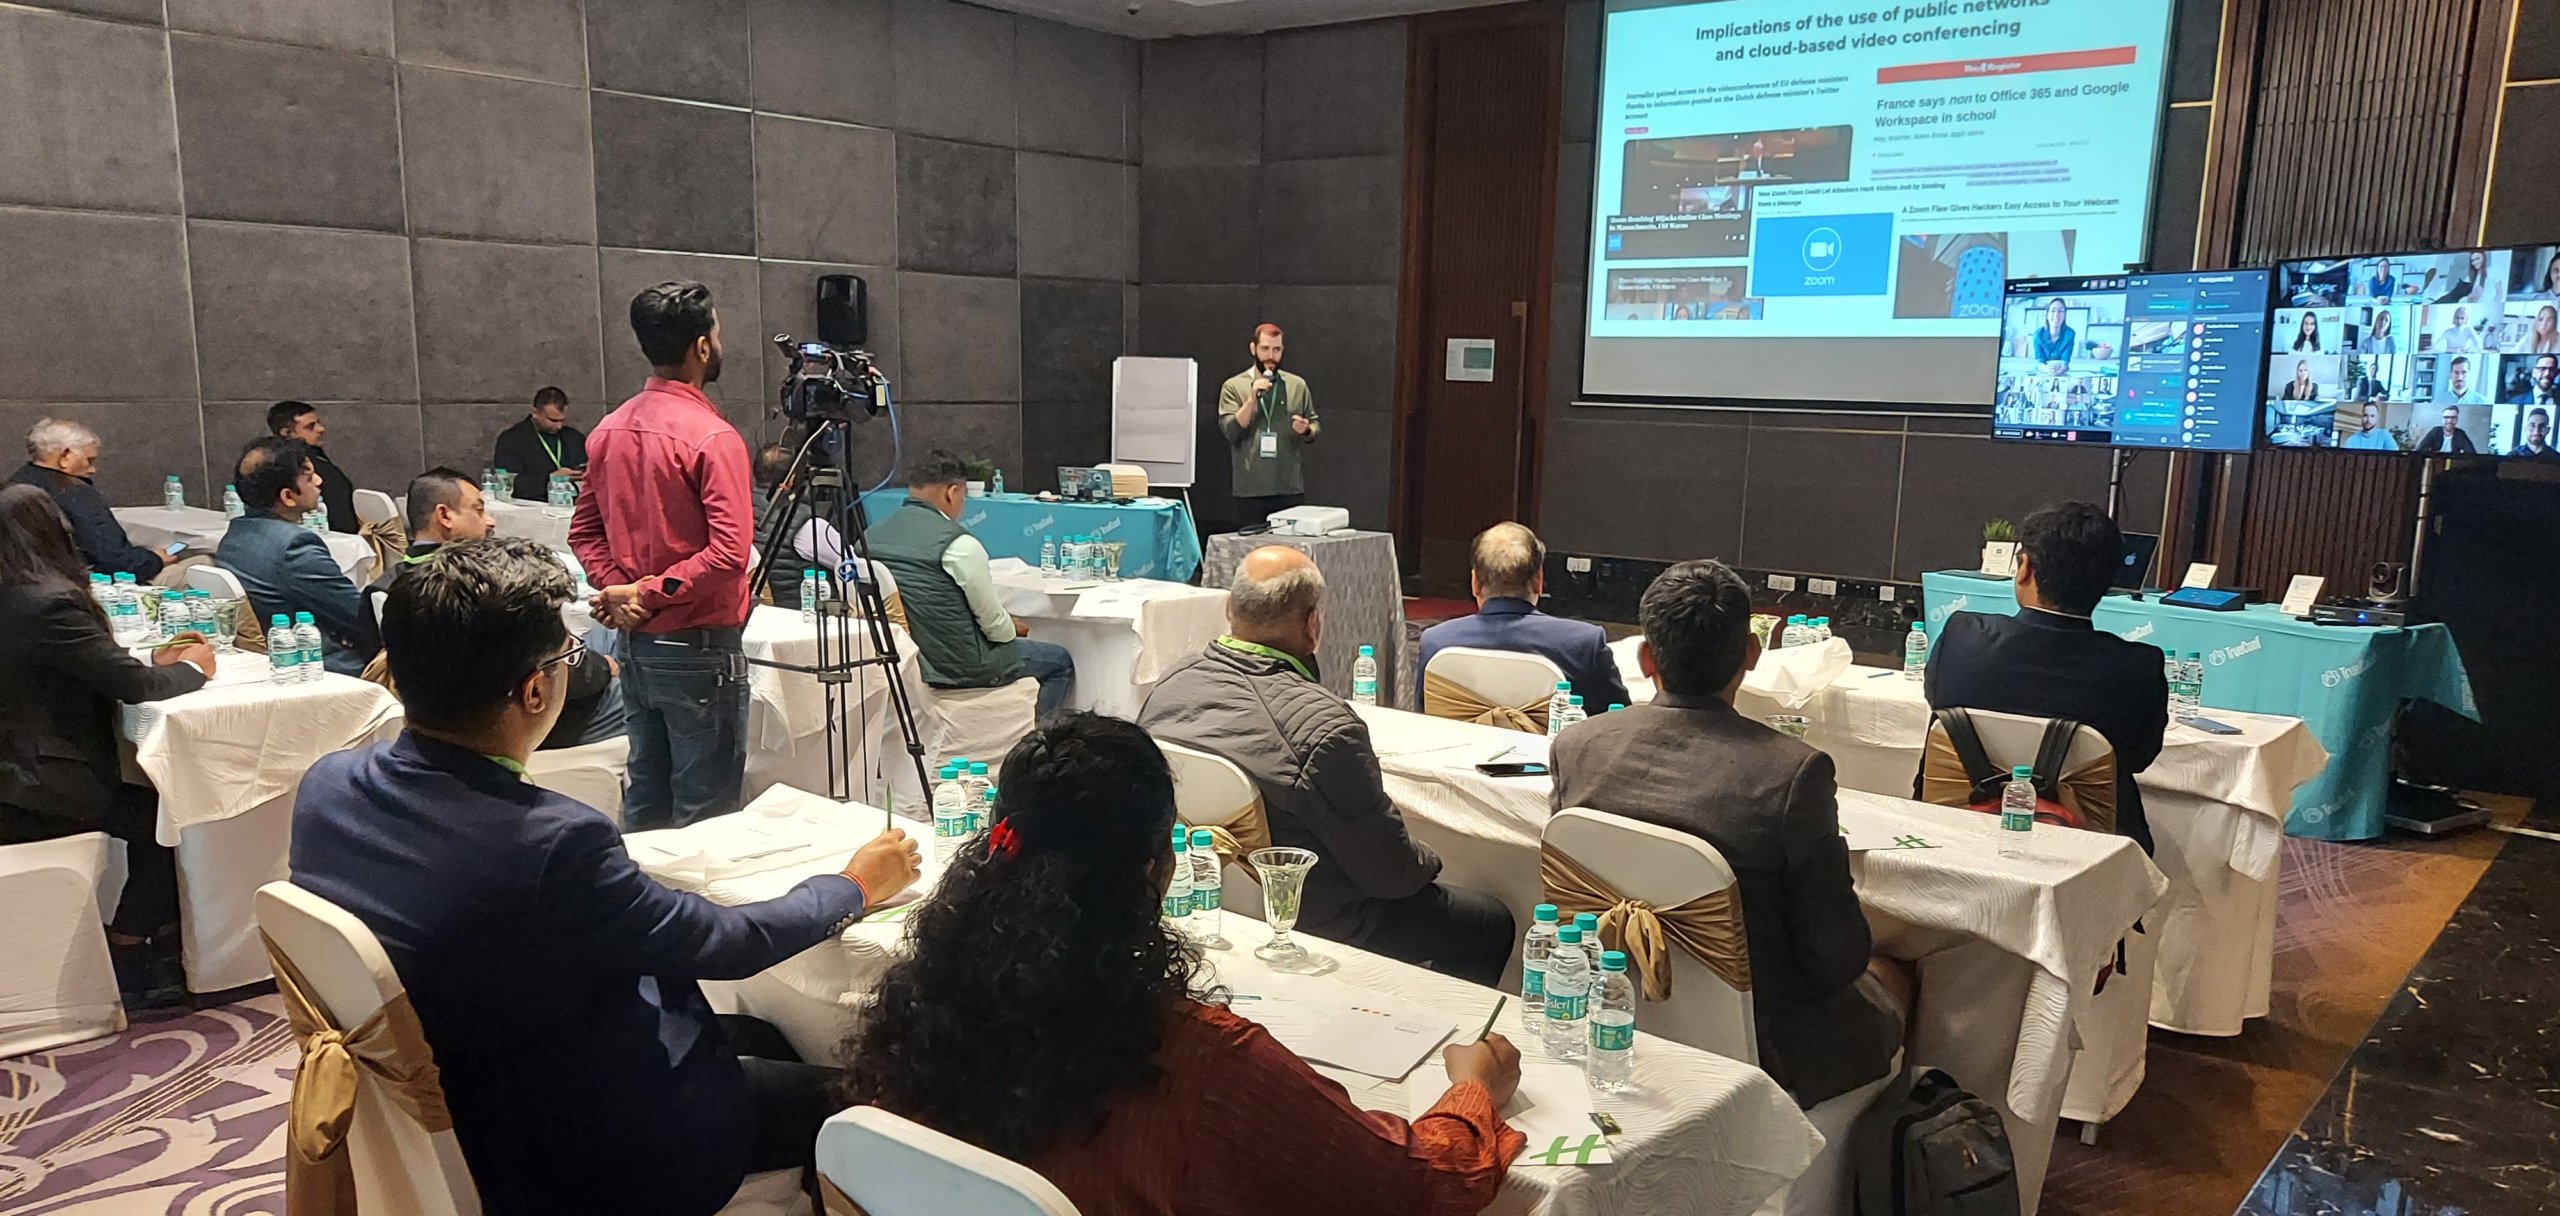 TrueConf events brought together Indian IT professionals 3